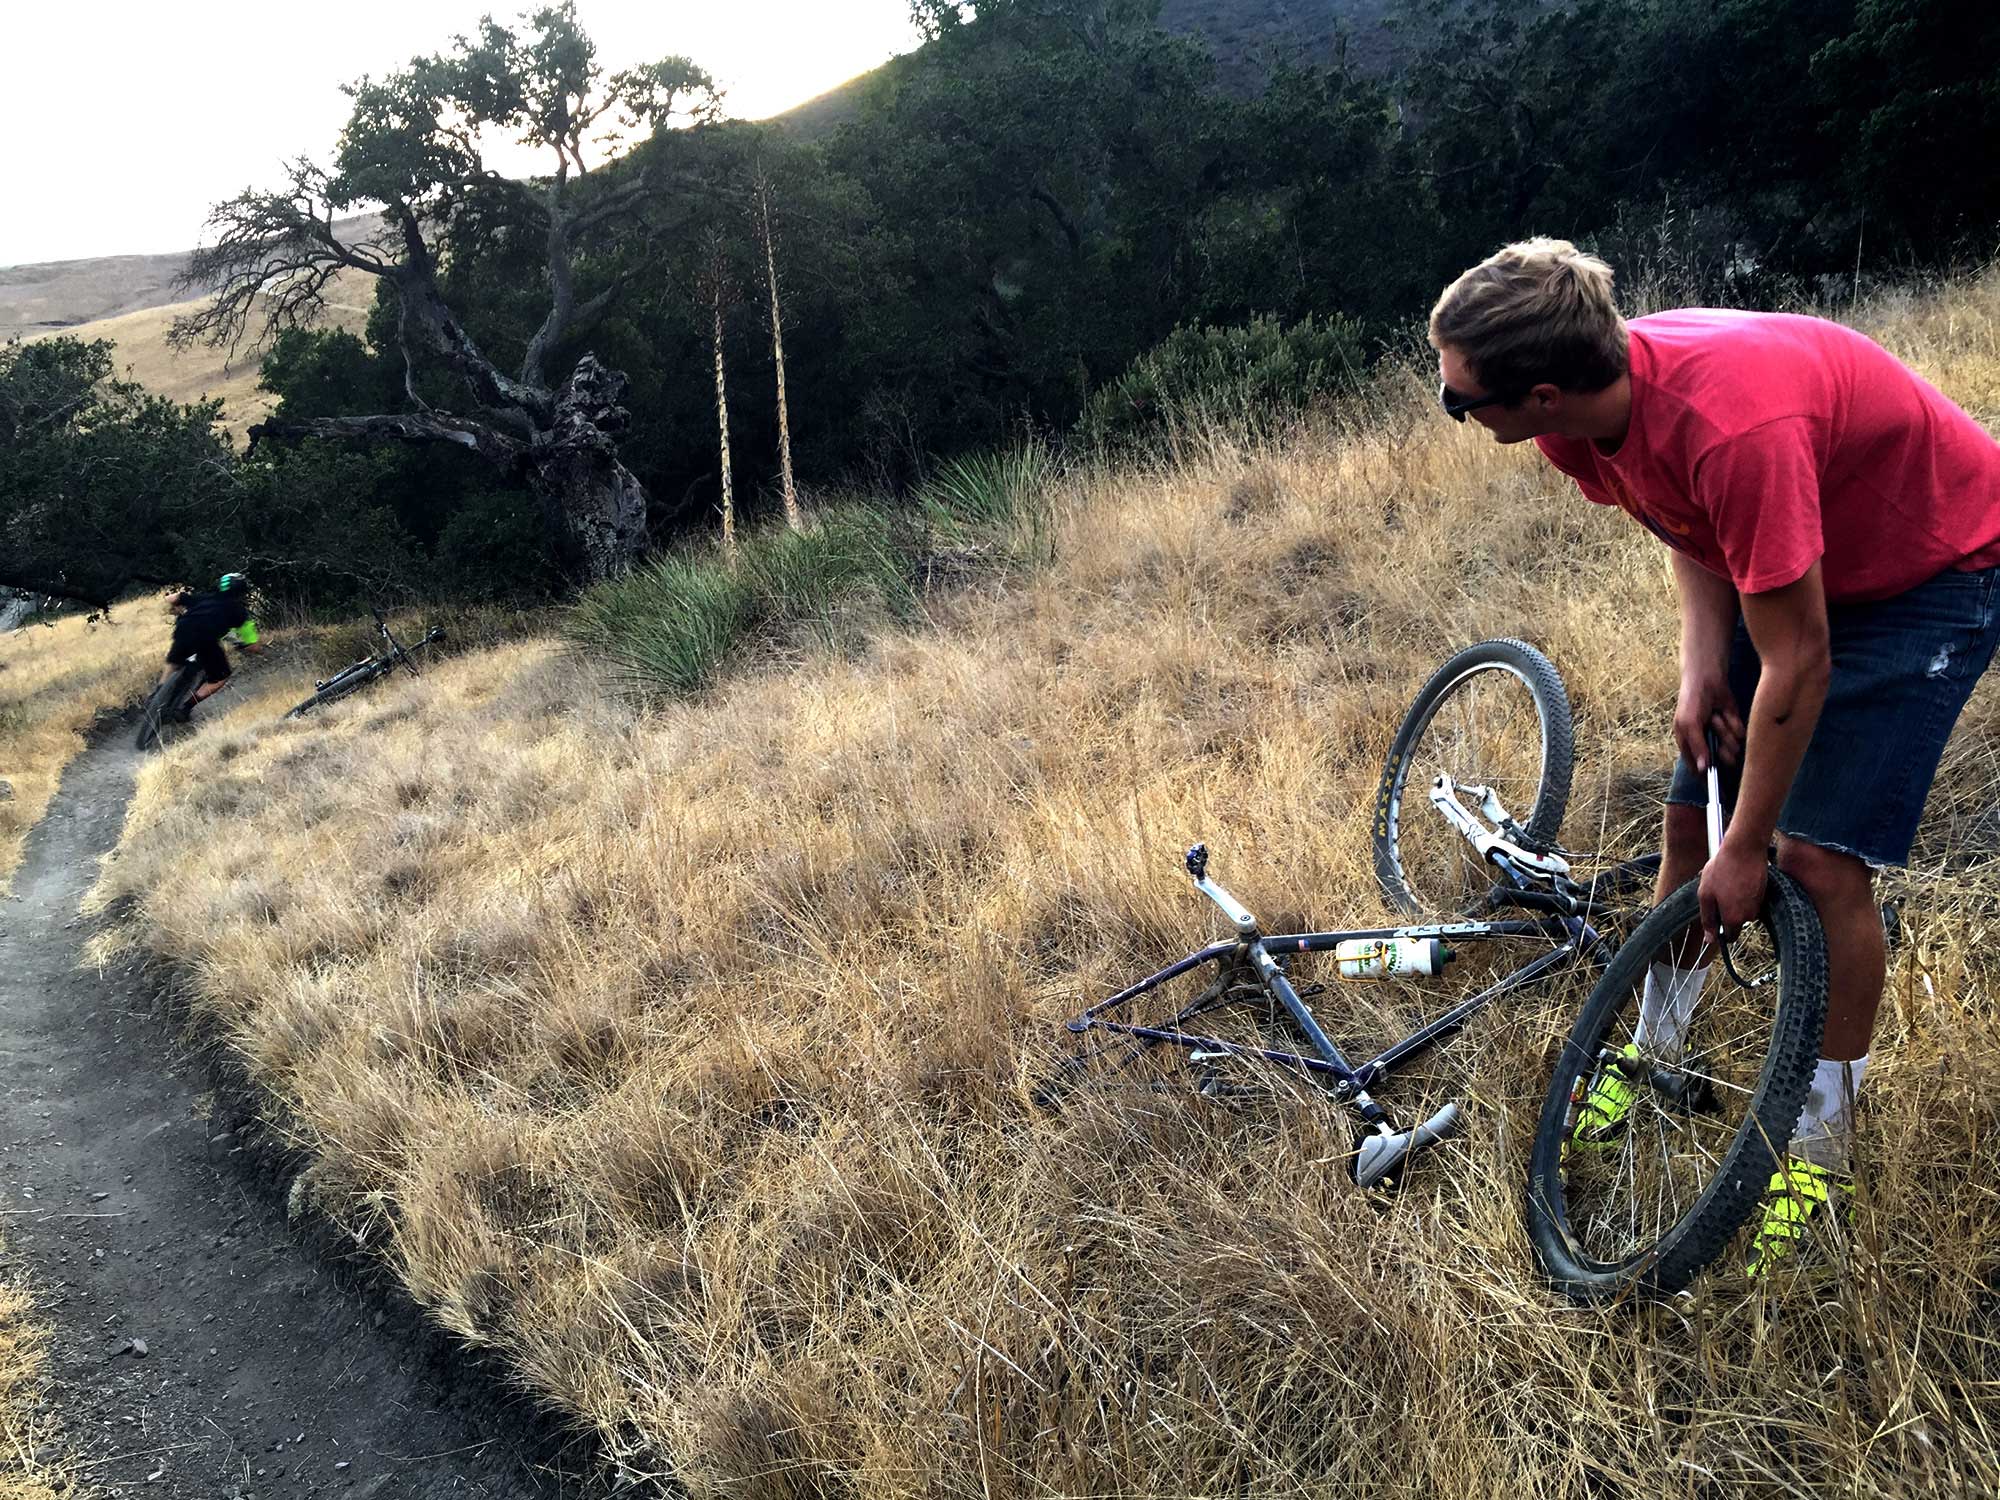 Oct. 7, 2016 – For Michael Beard, a general engineering sophomore at Cal Poly, it has been a difficult run on Hawaii Friday. During the past two weeks, Beard has encountered mechanical issues. While perched in Poly Canyon’s weeds, he inflates a flat tire. During maintenance, Beard spoke of a recent sell. 'Someone got a sweet bike for $100, after we flipped it and made $80. It was only $15 for all of the parts,' Beard said. He’s not opposed to work; however, dreaming of unencumbered singletrack, Beard watches Ryan Miller zoom towards the sunset. Miller, a mechanical engineering junior at Cal Poly, is Cal Poly Cycling’s vice president.